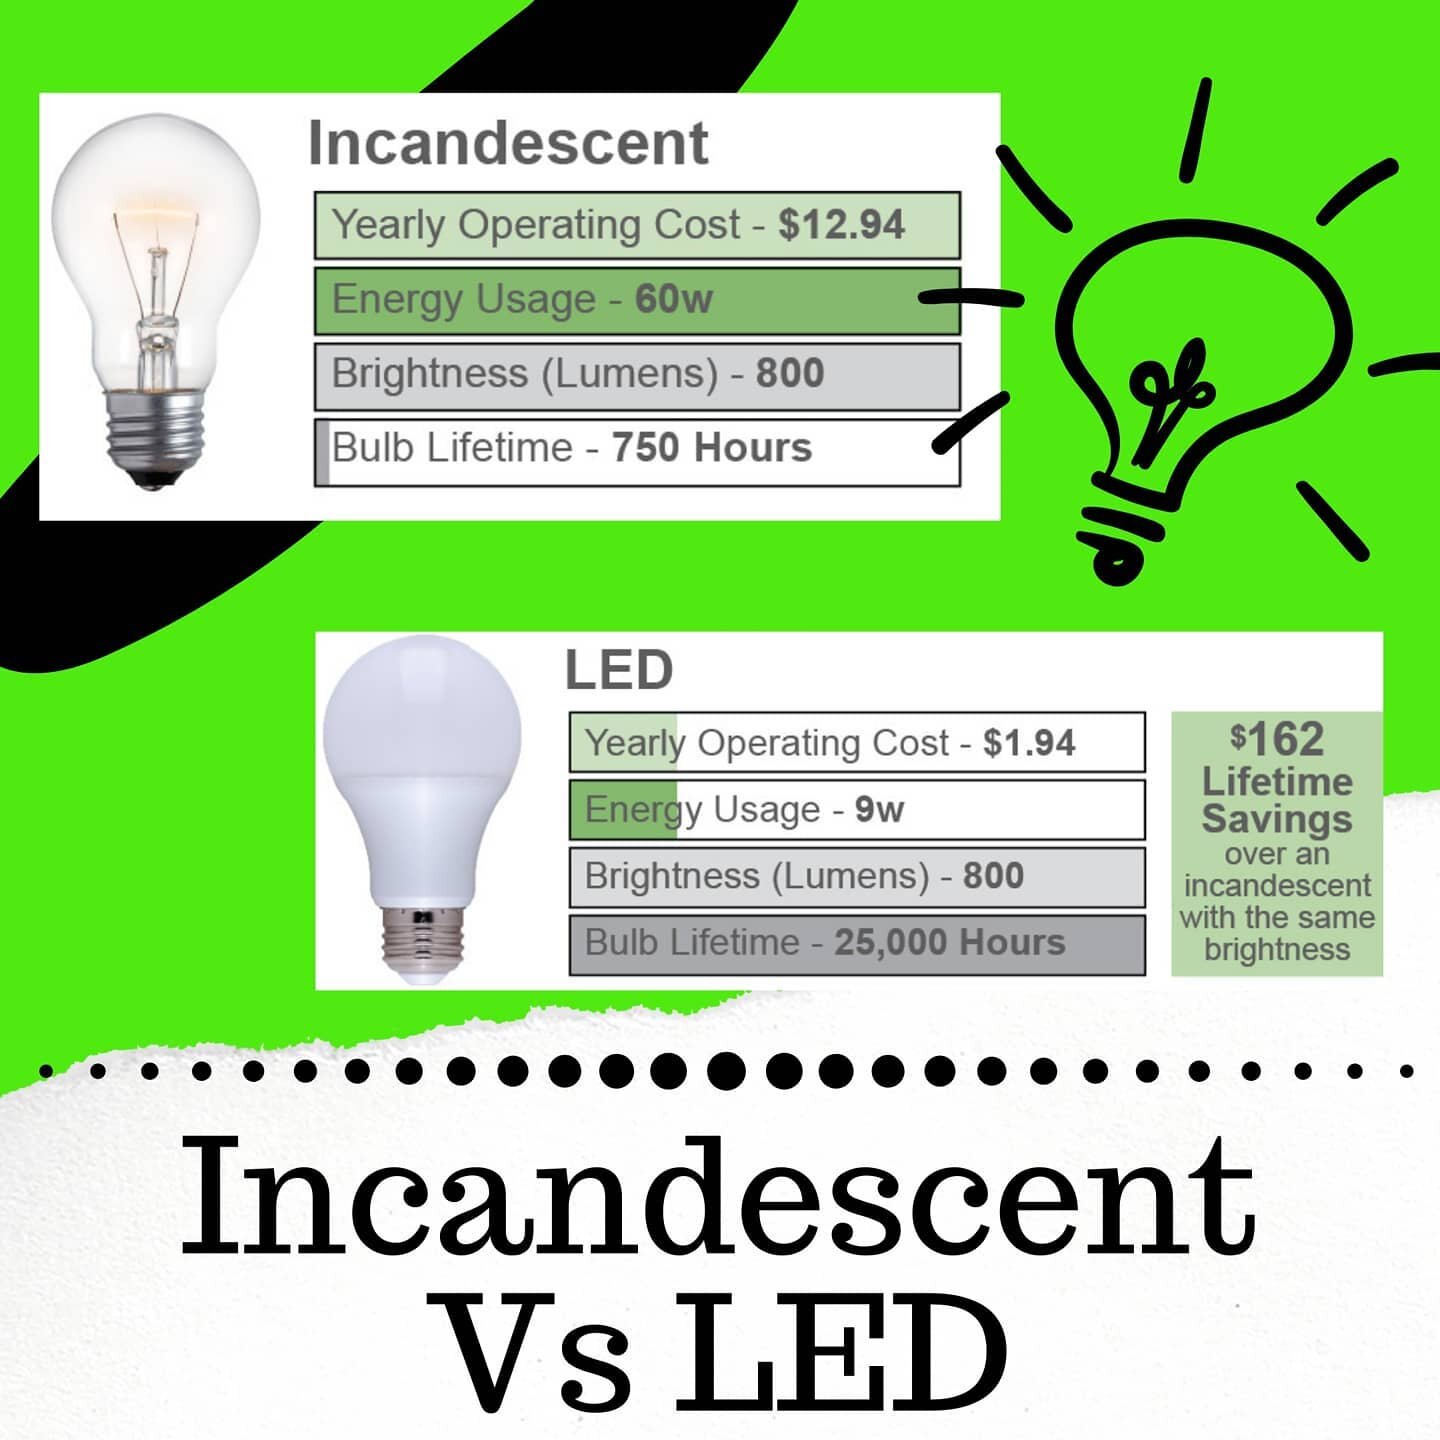 This is a crazy difference!
If someone told you that one inexpensive change could save you money, benefit the environment, and improve your productivity, would you jump at the opportunity? Without a doubt, switching to LED lights can provide long-ter